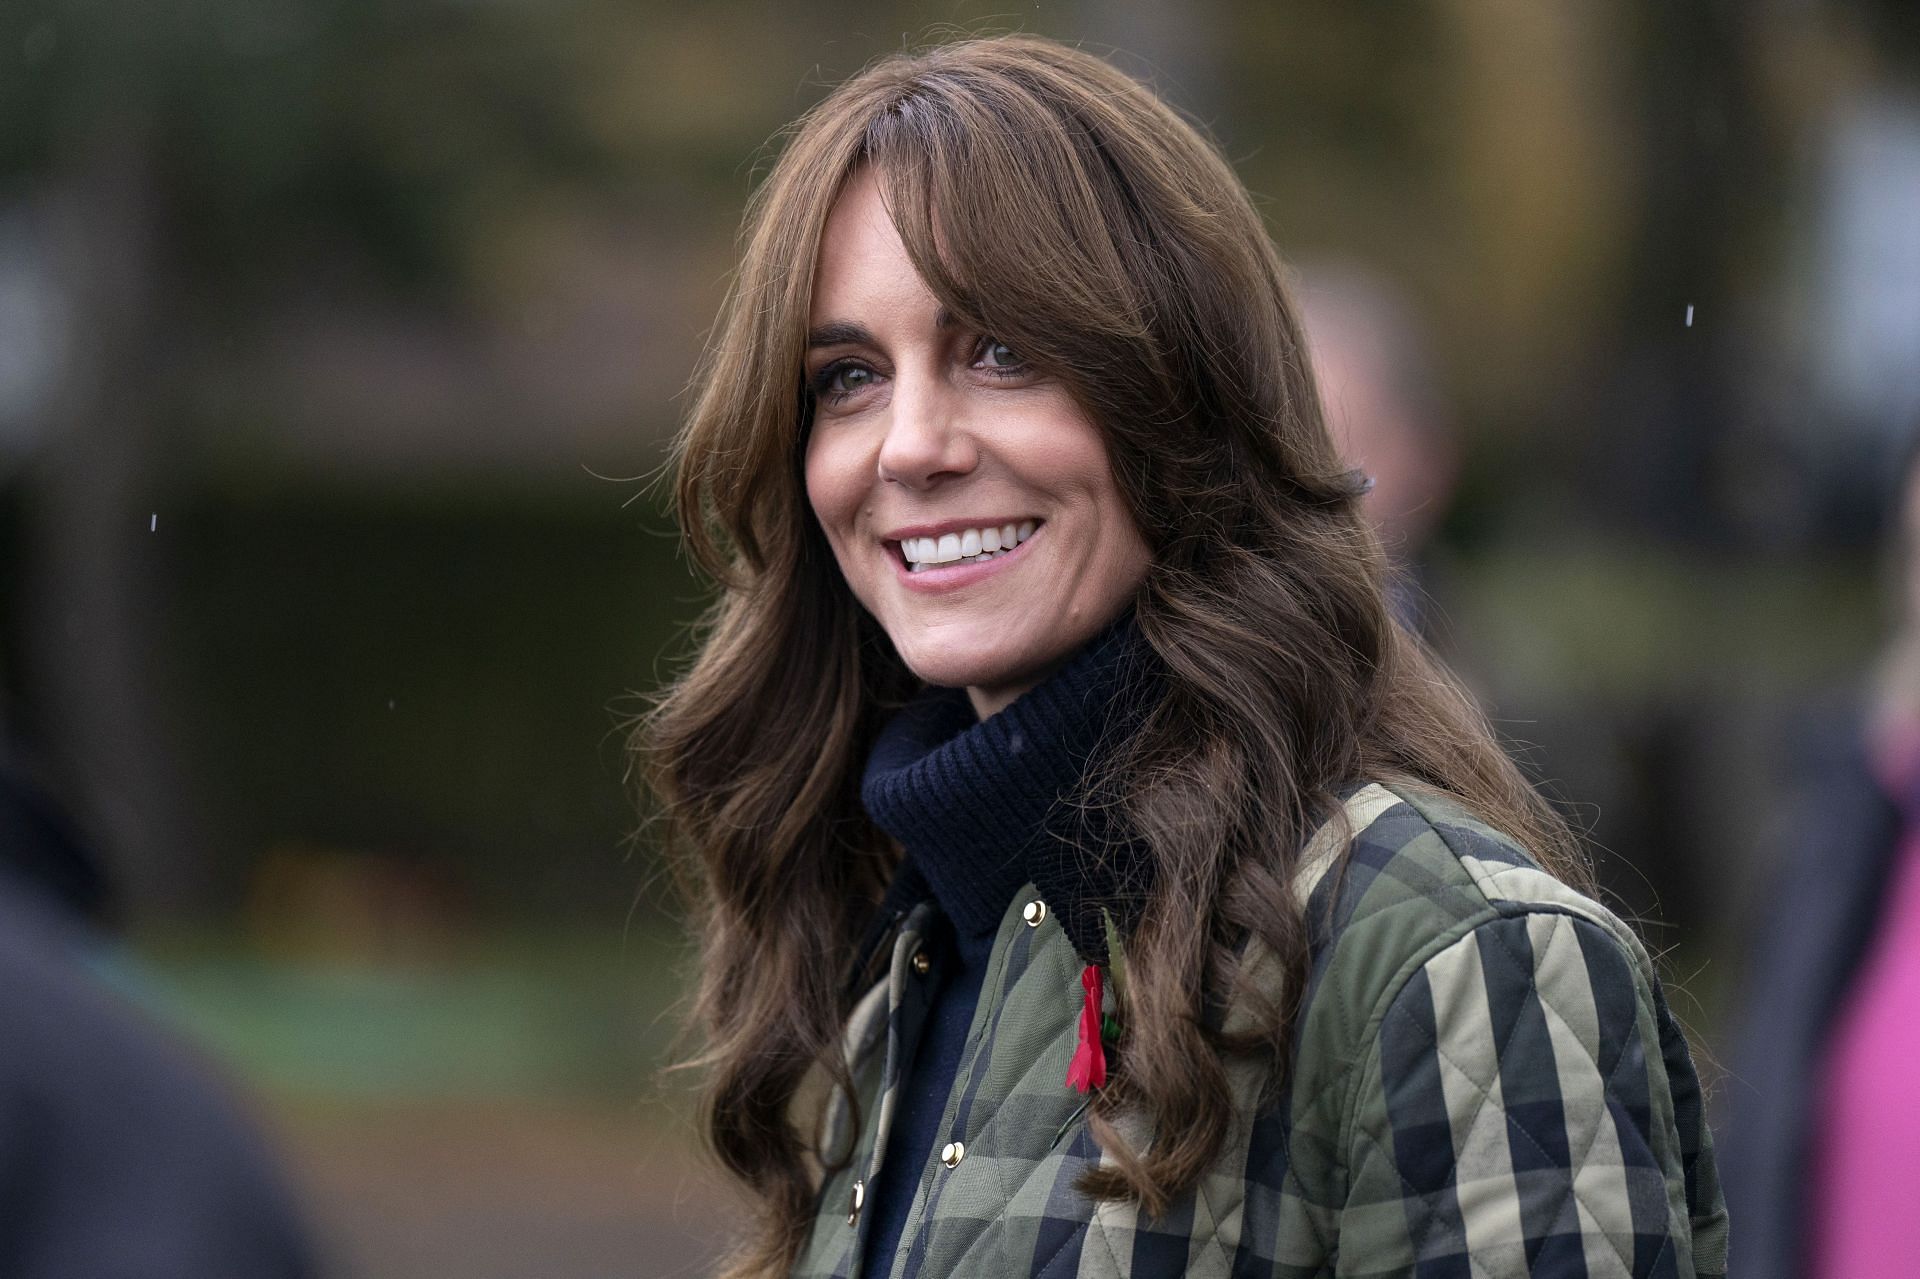 The Duchess is expected to resume Royal responsibilities this year (Image via Getty)